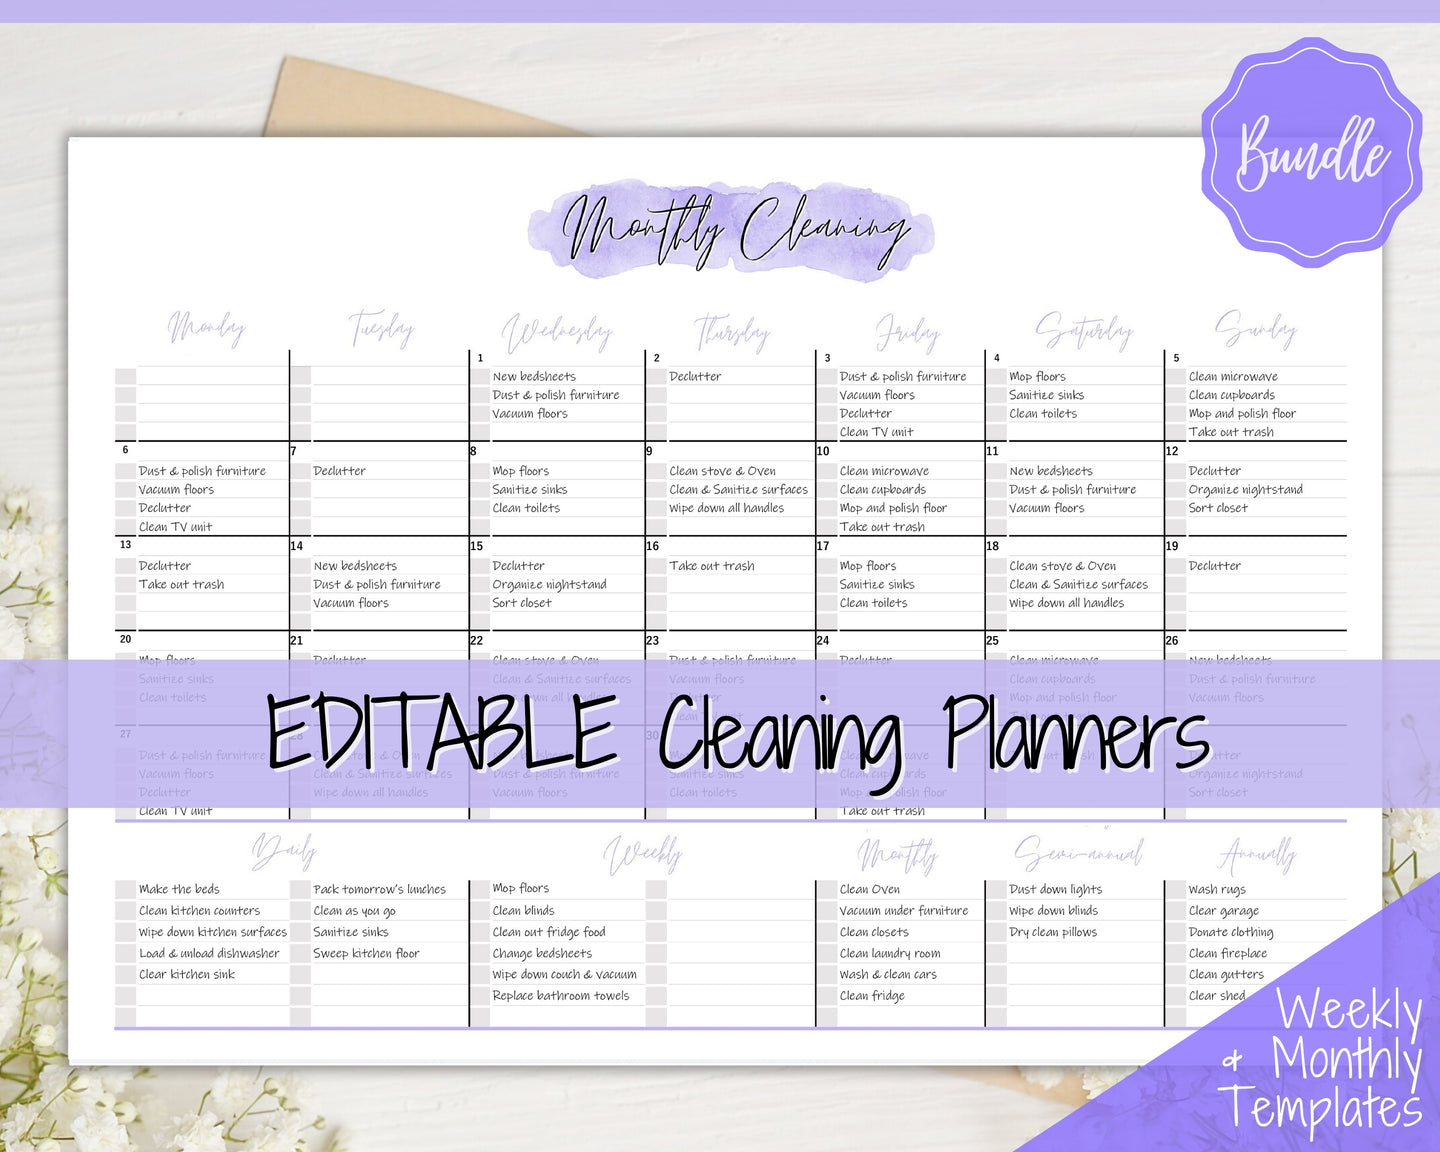 EDITABLE Cleaning Planner, Cleaning Checklist & Cleaning Schedule | Weekly House Chores, Clean Home Routine, Monthly Cleaning List | Purple